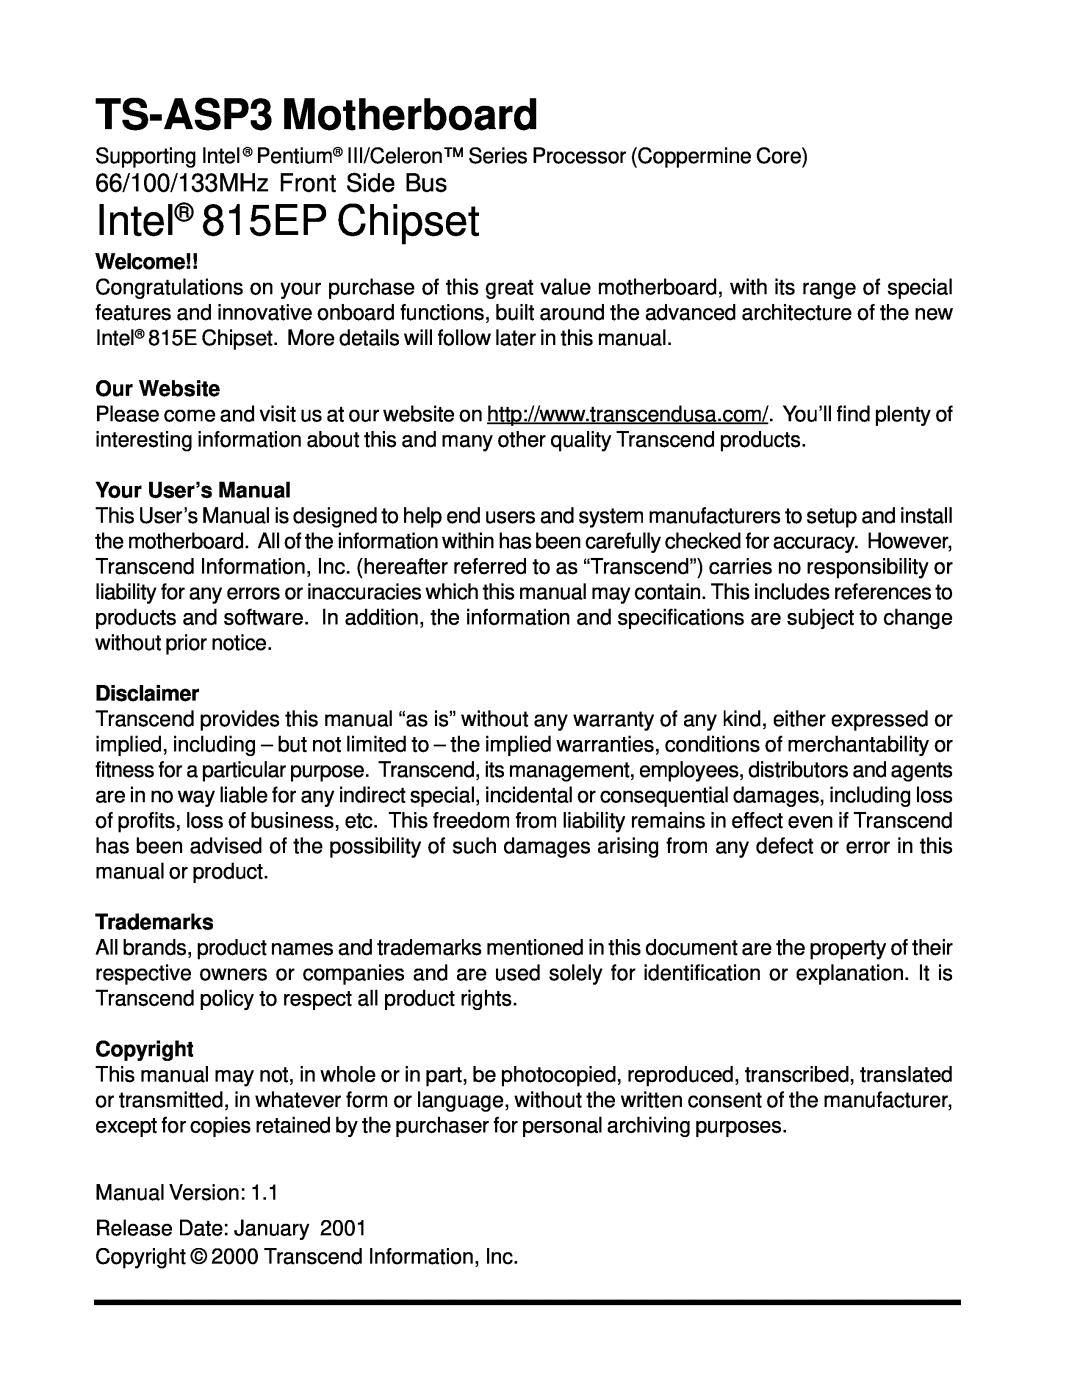 Intel user manual TS-ASP3Motherboard, 66/100/133MHz Front Side Bus, Intel 815EP Chipset 